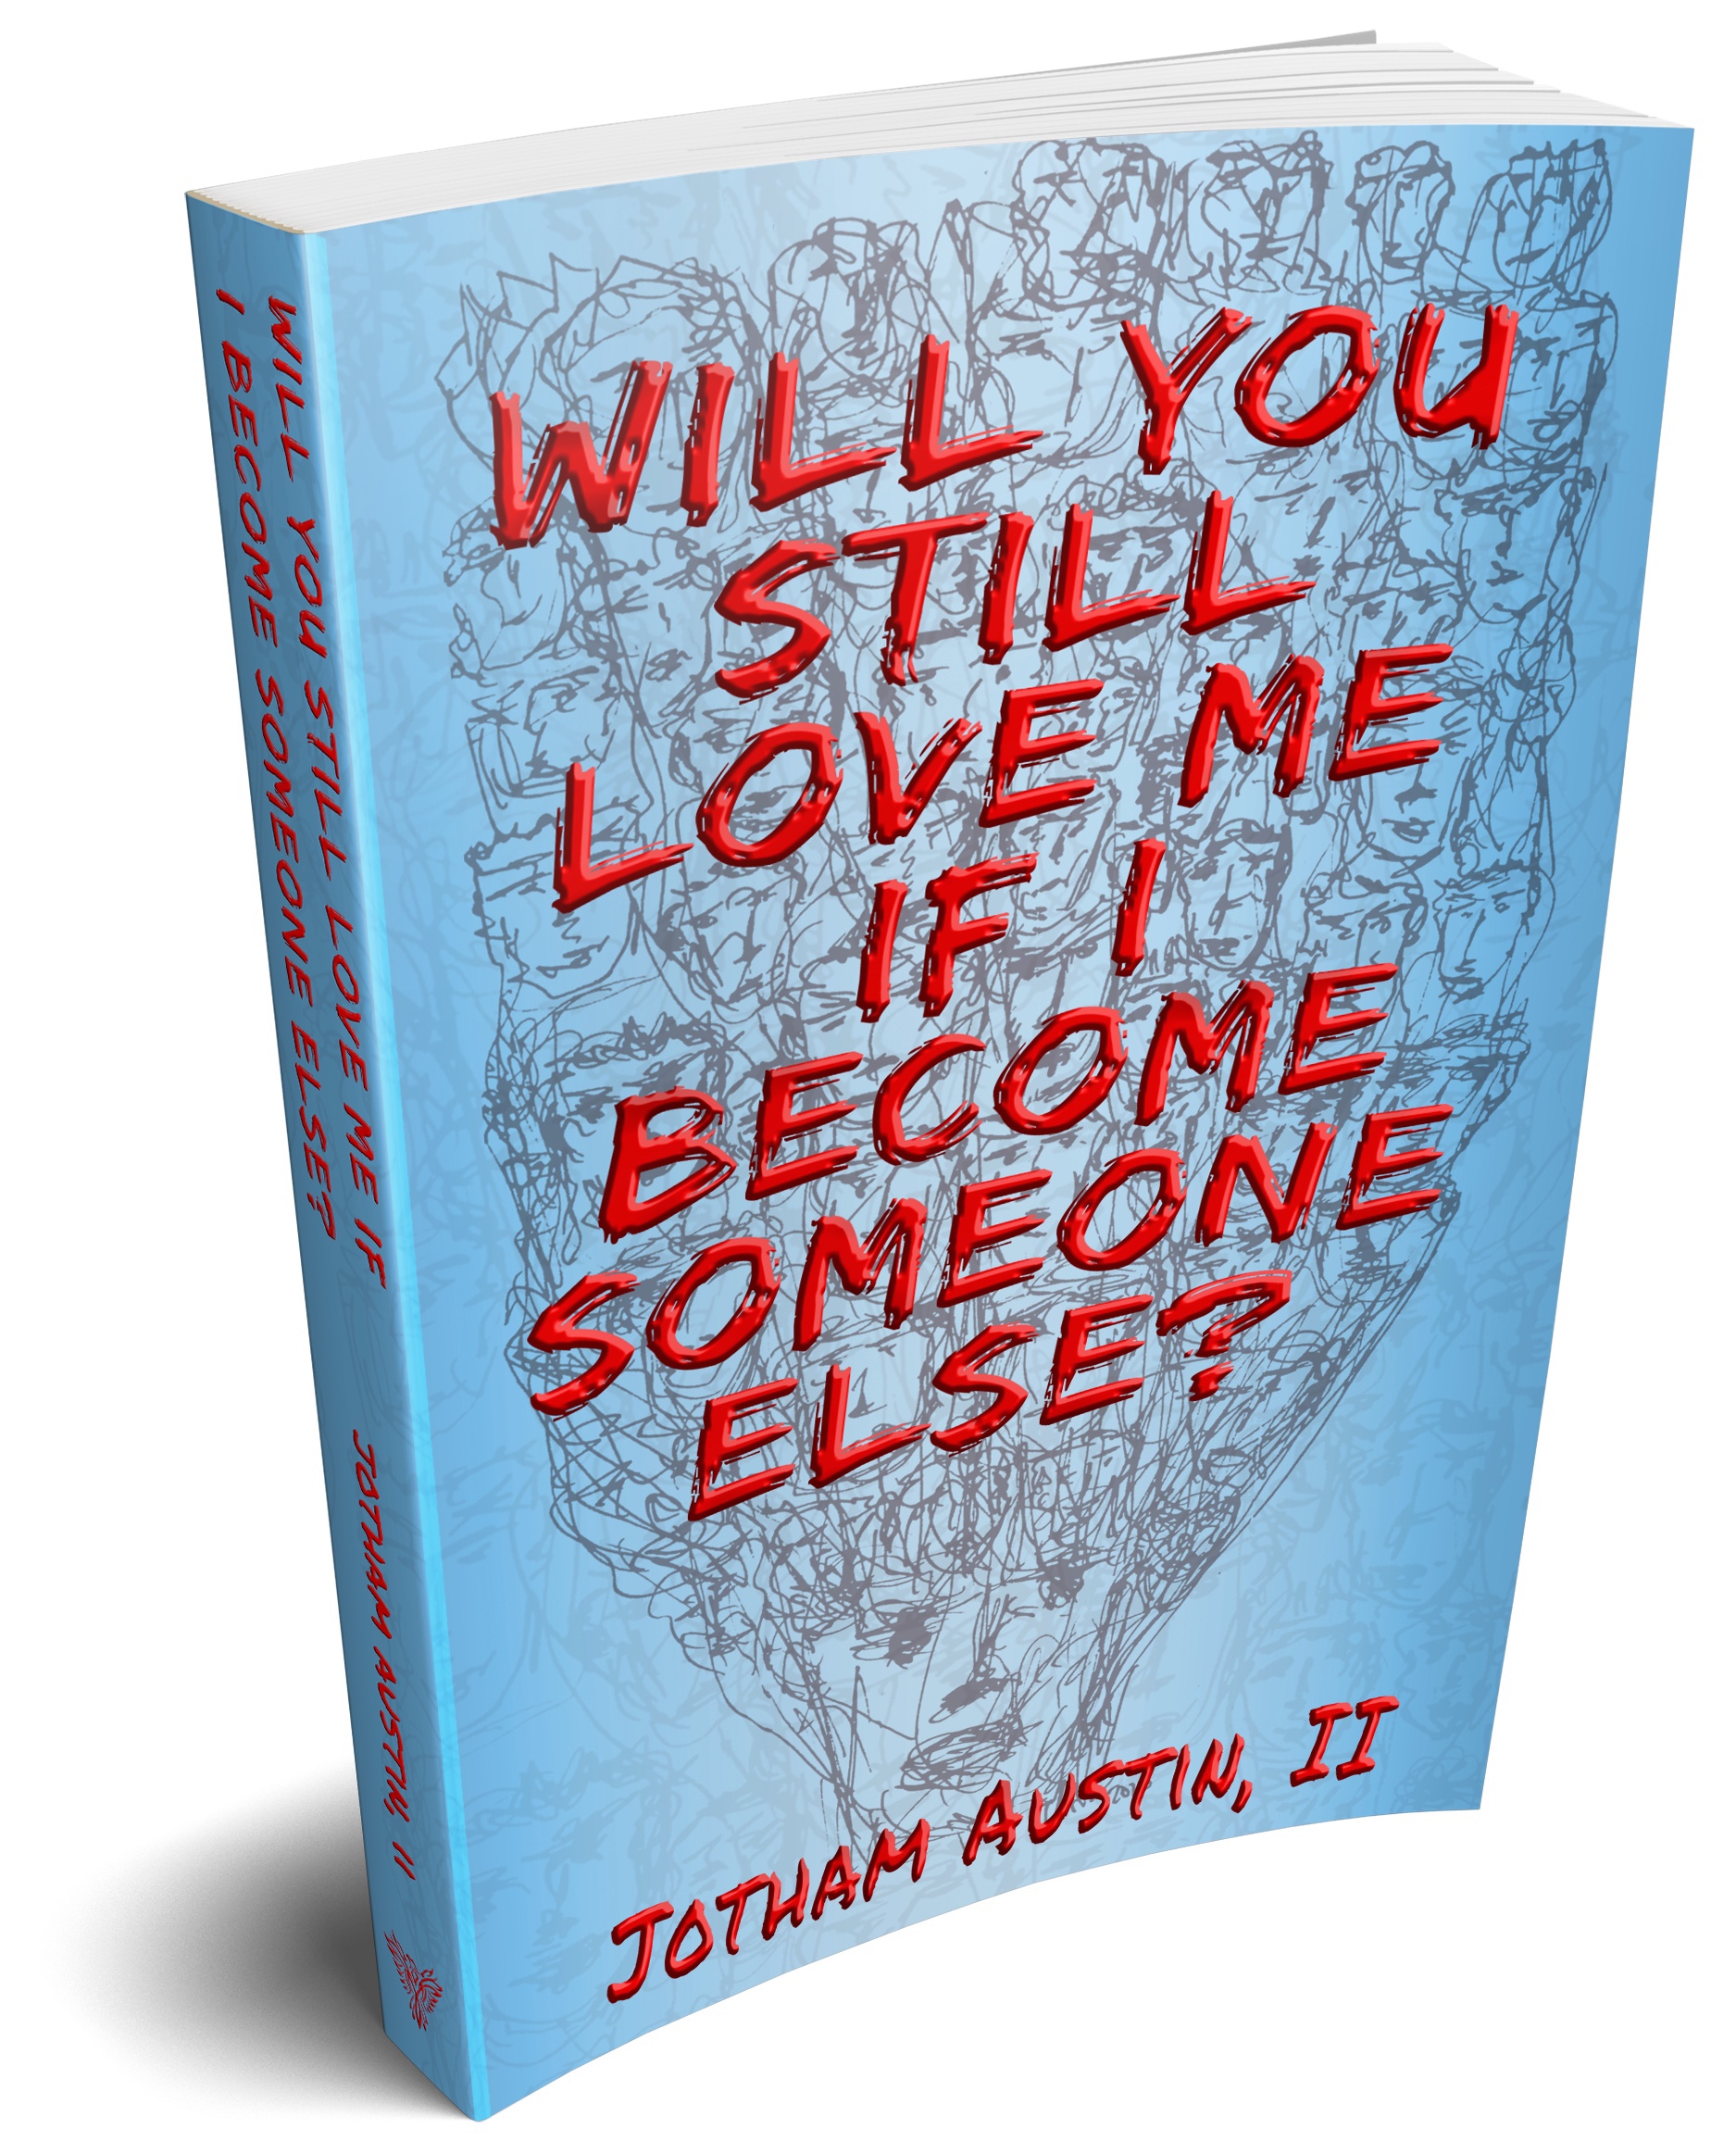 Cover of novel with an illustration of a face with many interconnected faces coming out the top, and bold red letter of the title, “Will You Still Love Me If I Become Someone Else?” And the author name Jotham Austin, II